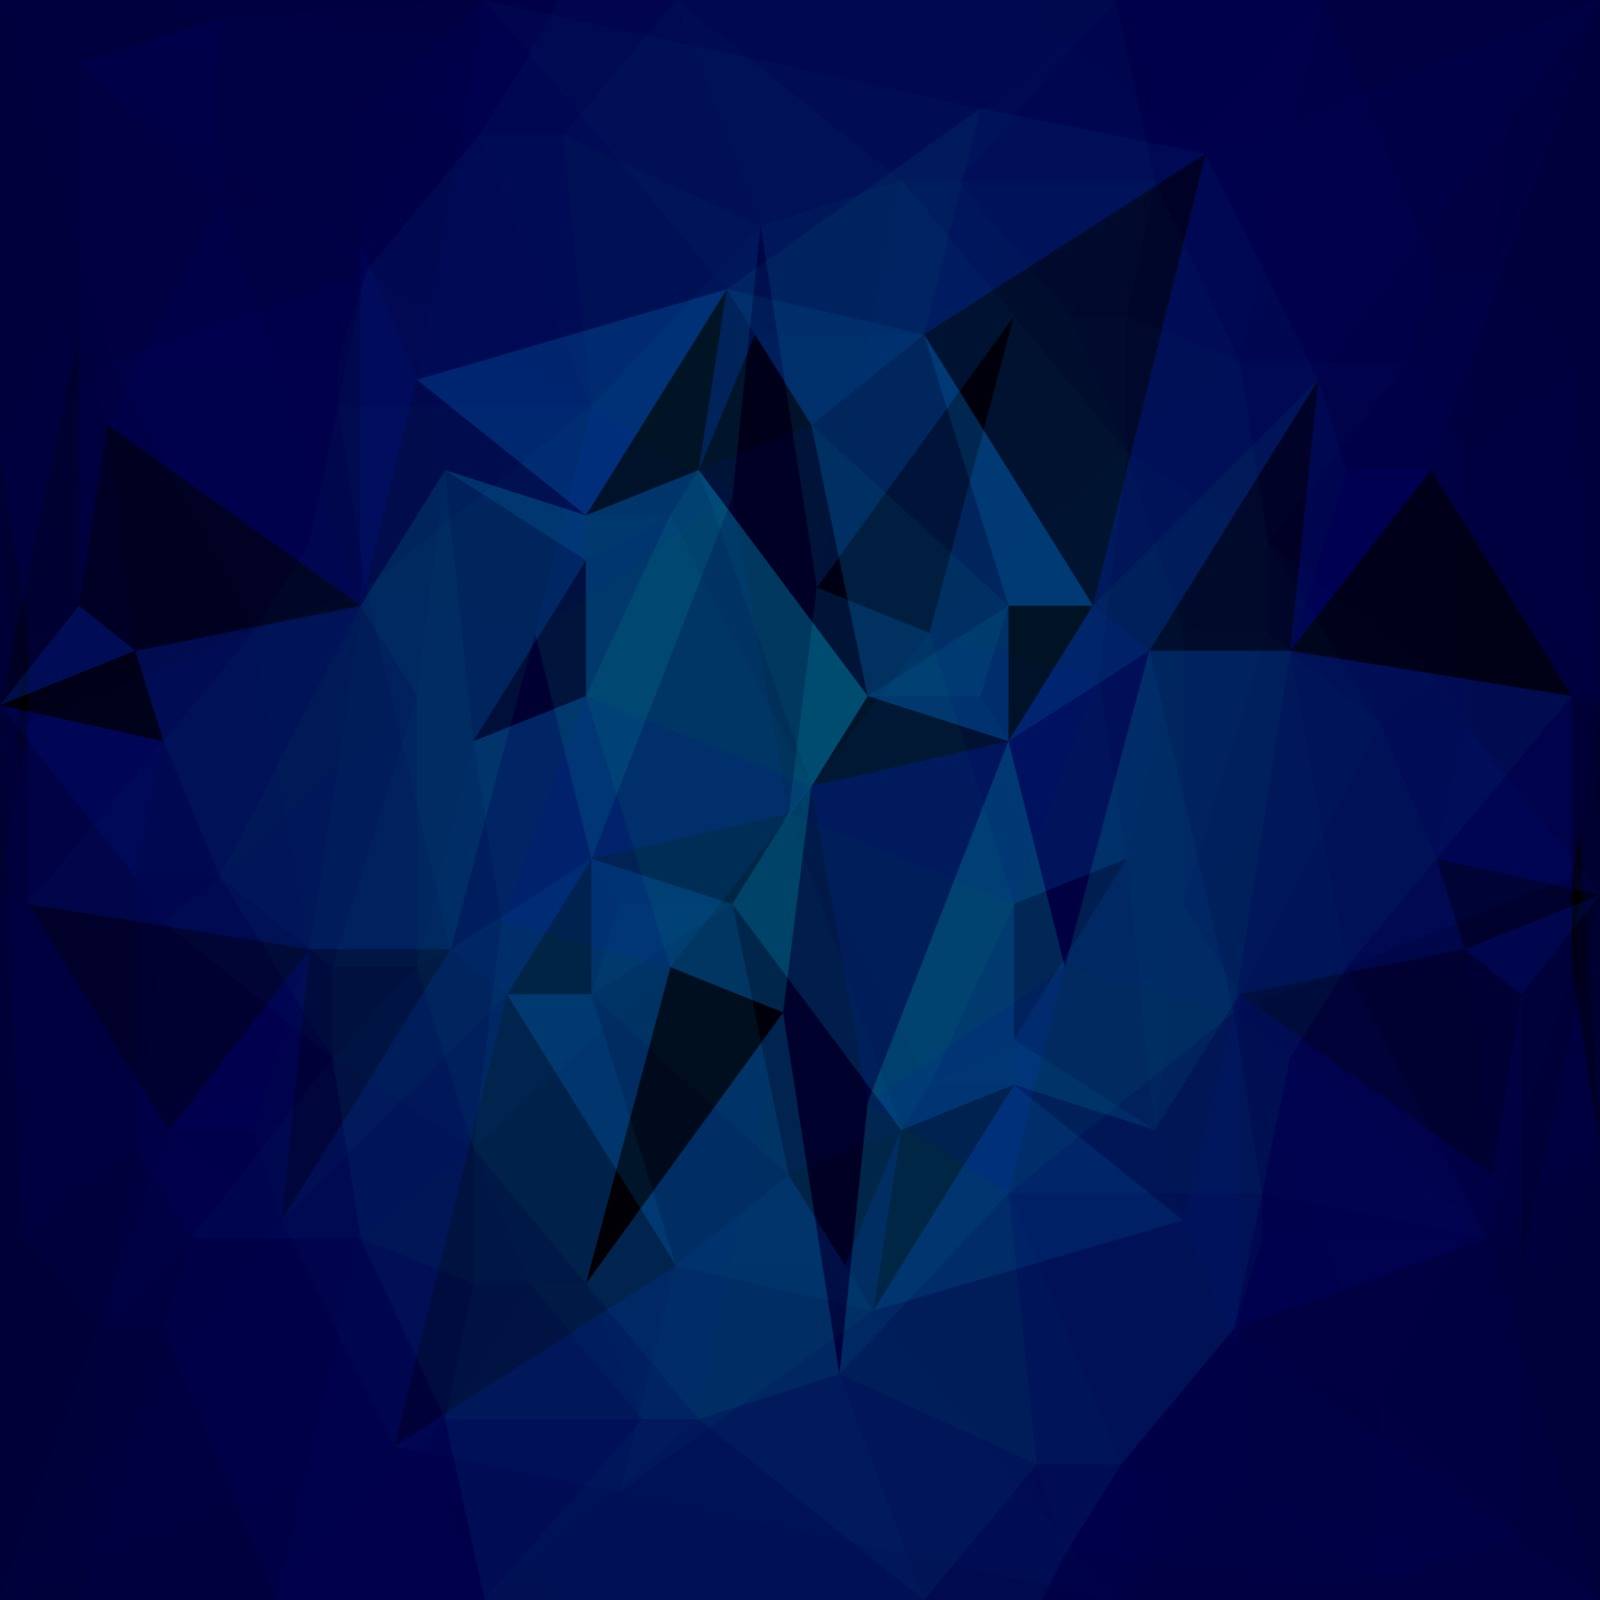 Abstract Polygonal Blue Background. Abstract Blue Geometric Pattern.